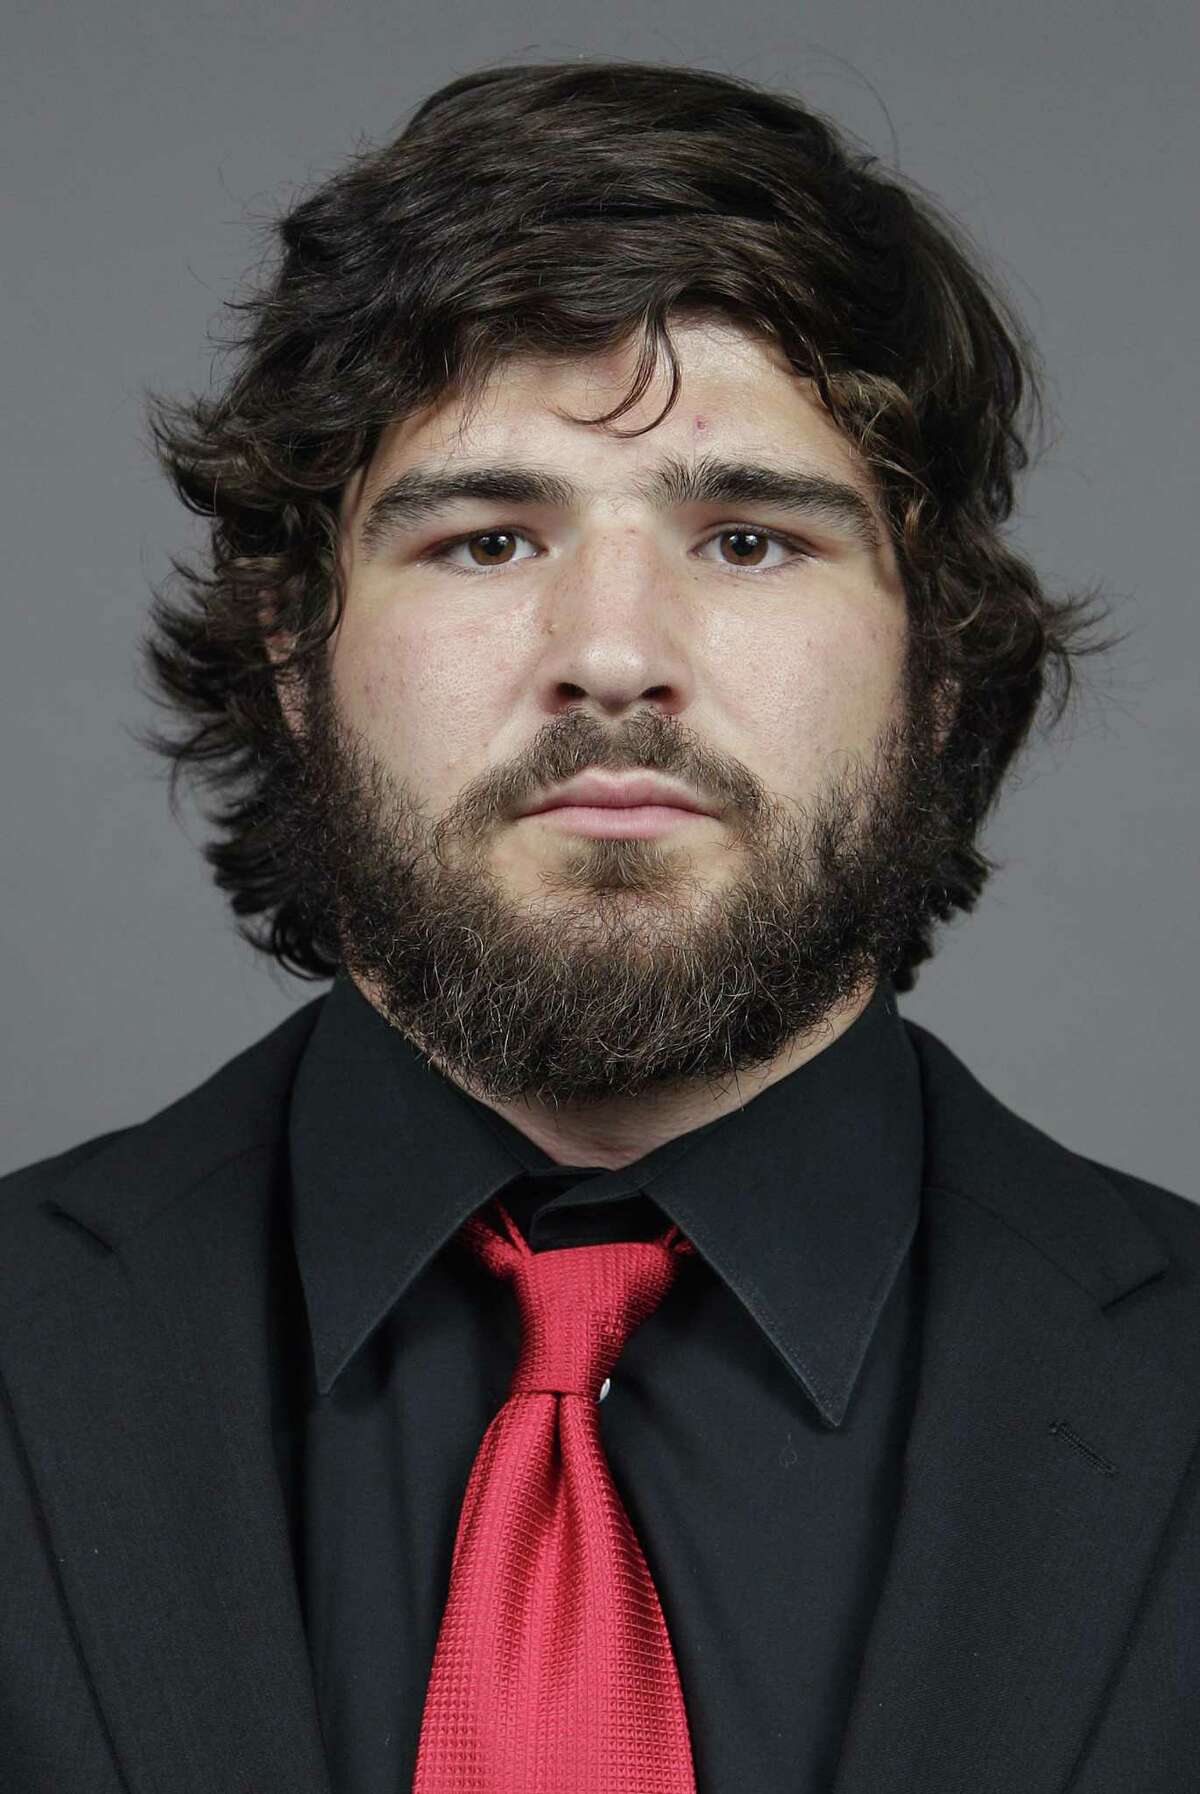 FILE - In this file image taken on Wednesday, Sept. 11, 2013, and provided by Ohio State University, college football player Kosta Karageorge poses for a photo in Columbus, Ohio. Police tell media outlets Sunday, Nov. 30, 2014, they believe a body found near the campus was that of 22-year-old Karageorge.